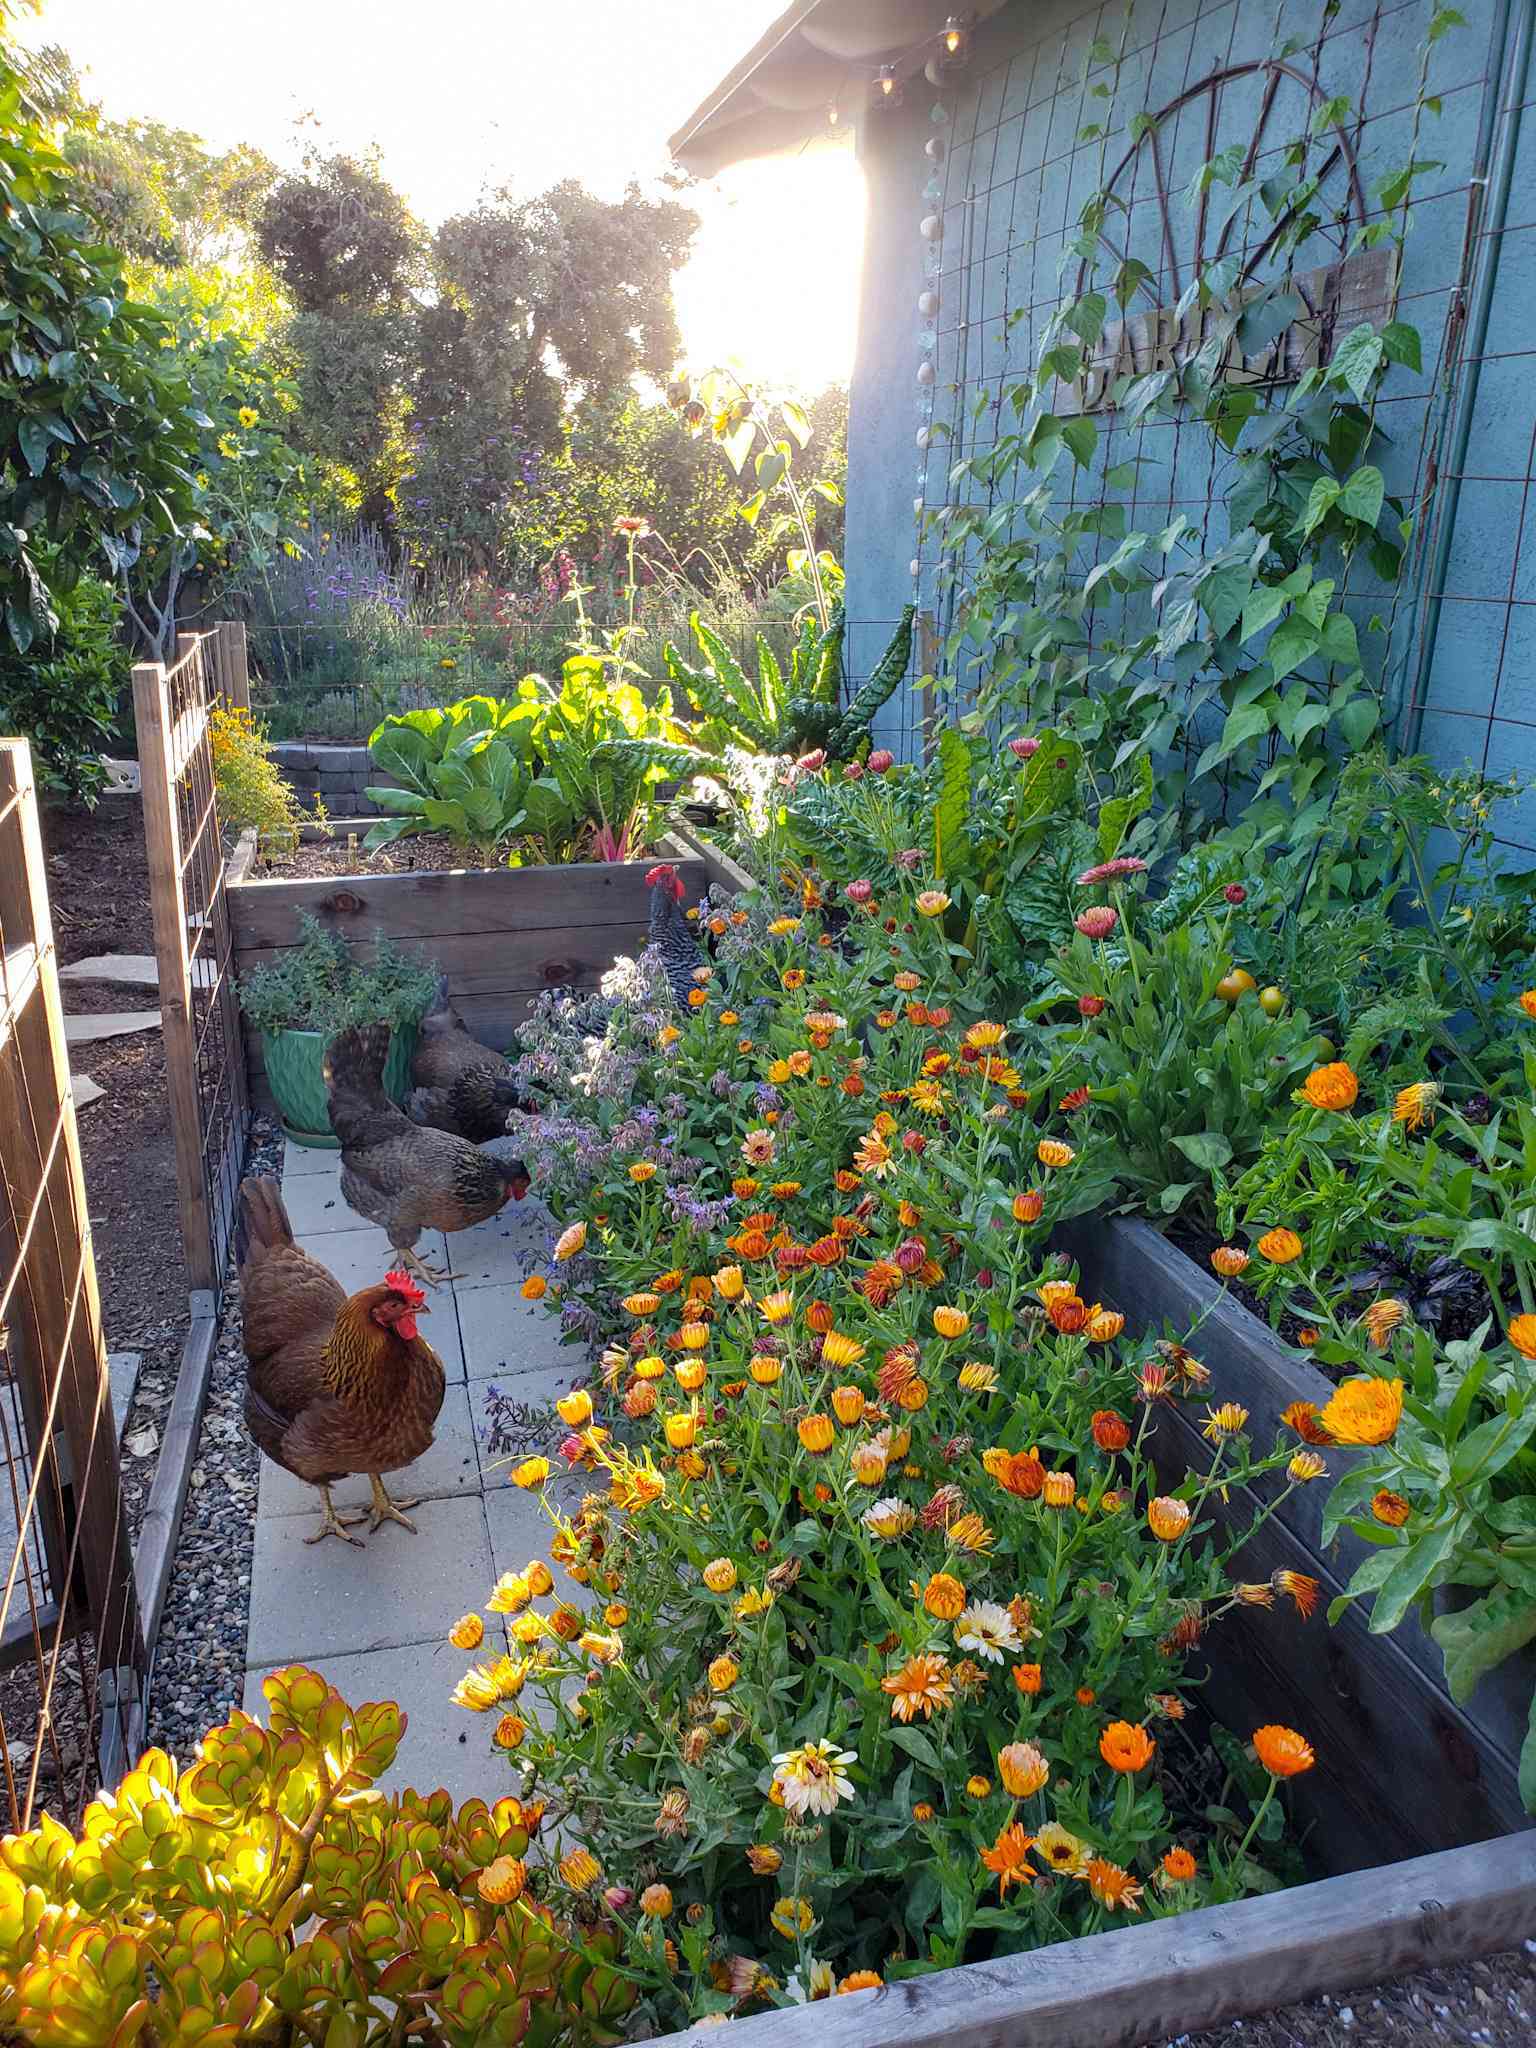 An image of raised garden beds with hundreds of calendula blooms growing in front of them. There are chickens in the garden area, and climbing pole beans going up a trellis along the back of the beds, which abut a blue house. The blooms are orange, red, pink, and yellow. Other leafy greens also grow in the beds. The sun shines in the distance, low on the horizon. 